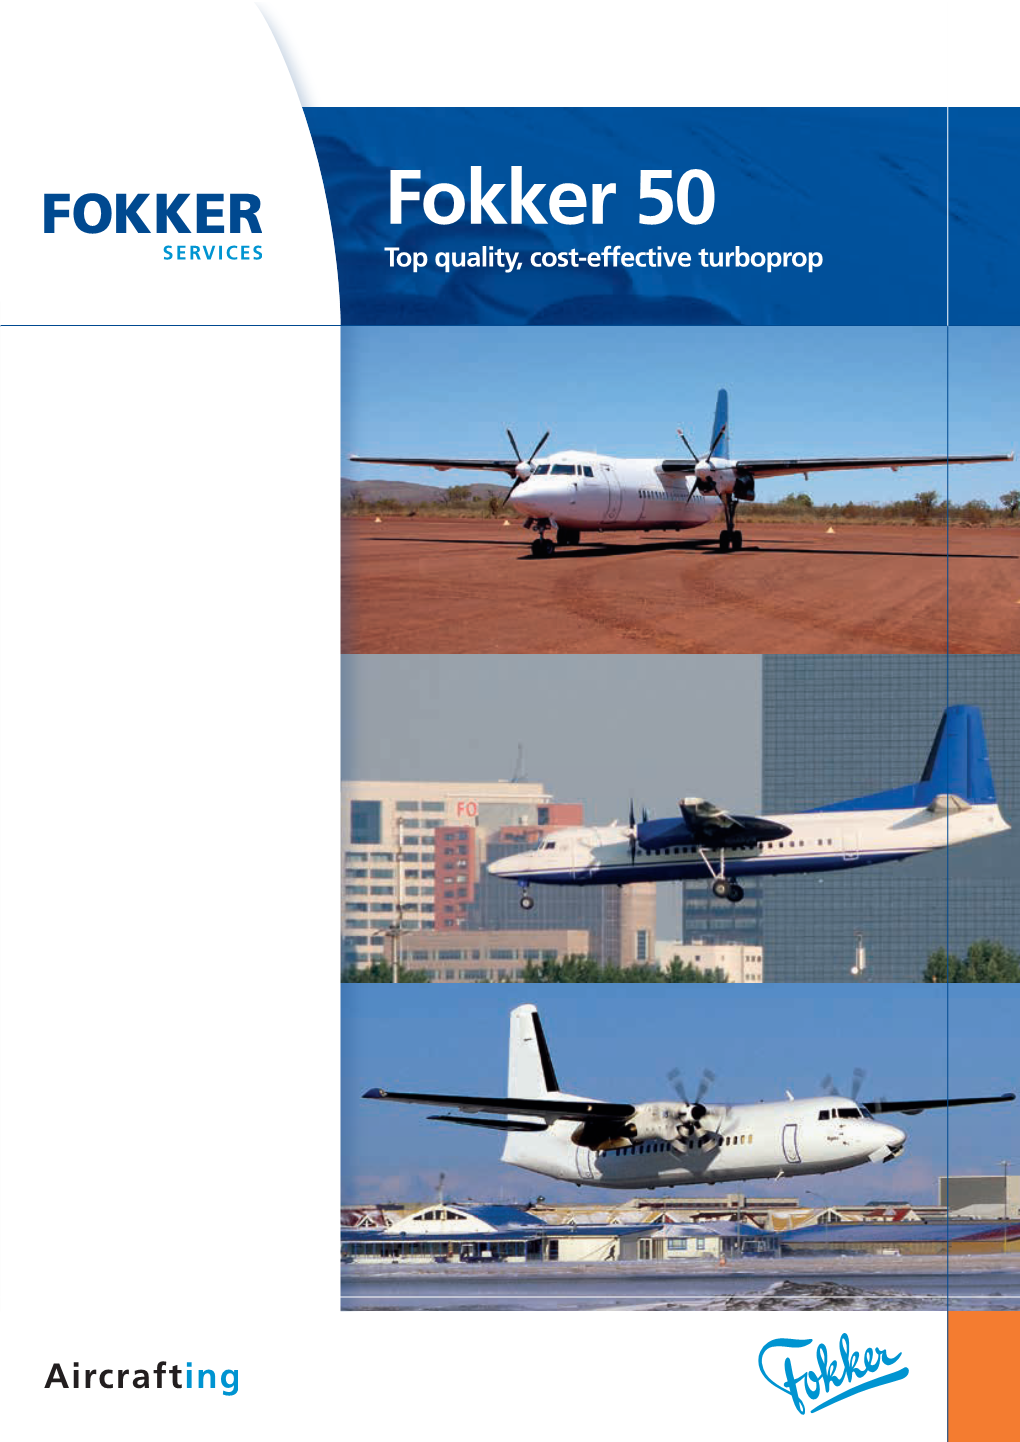 Fokker 50 Top Quality, Cost-Effective Turboprop